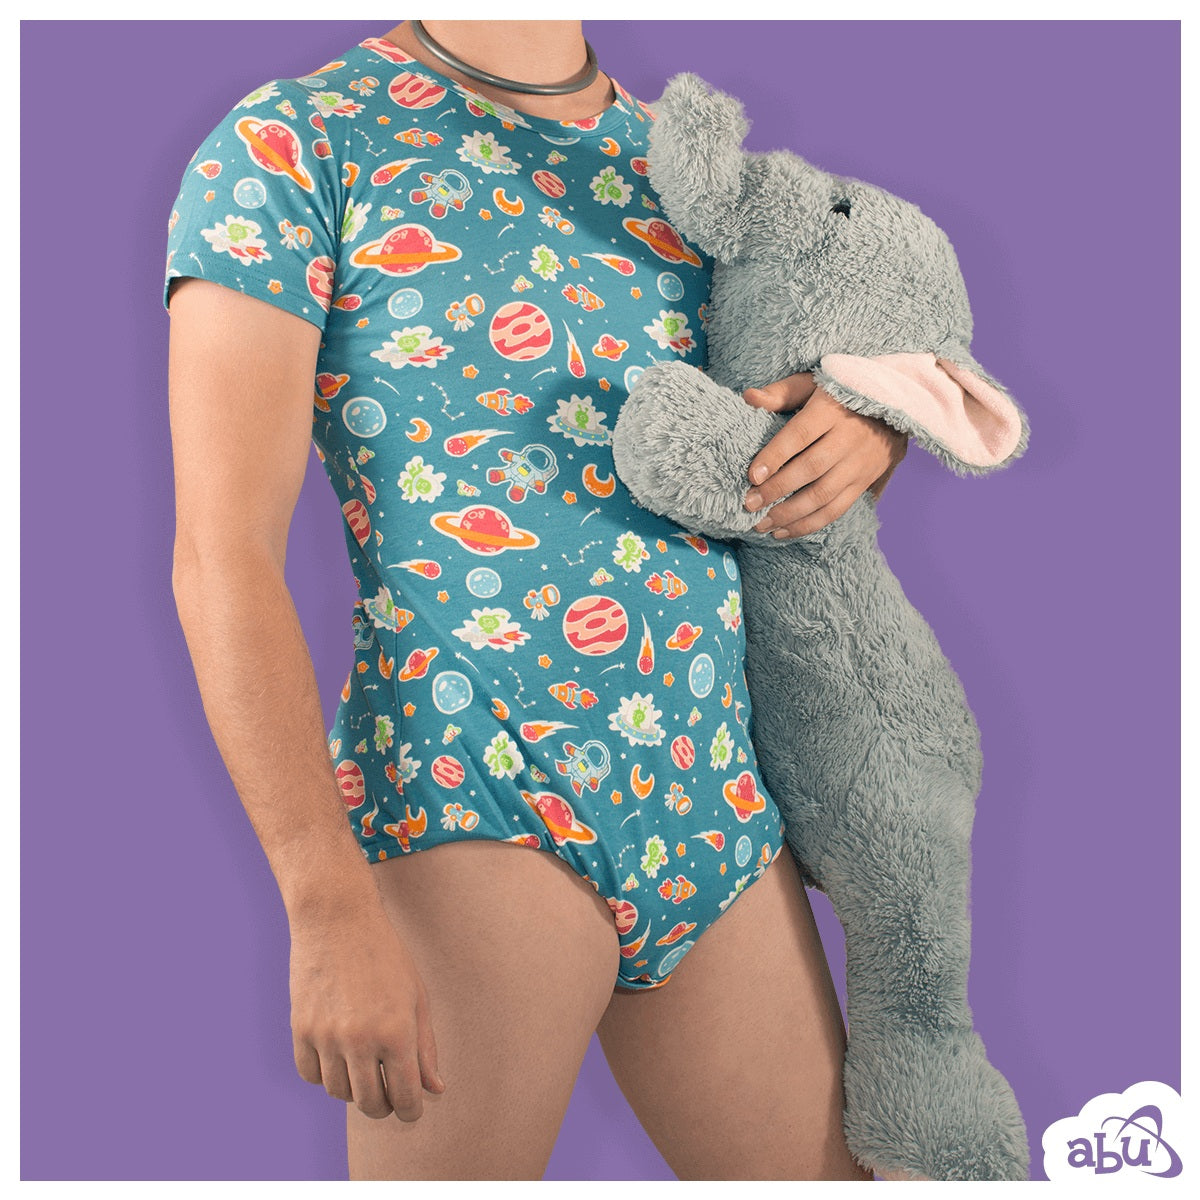 Front view of model wearing space print diapersuit with disposable diaper worn underneath and holding a stuffed elephant.